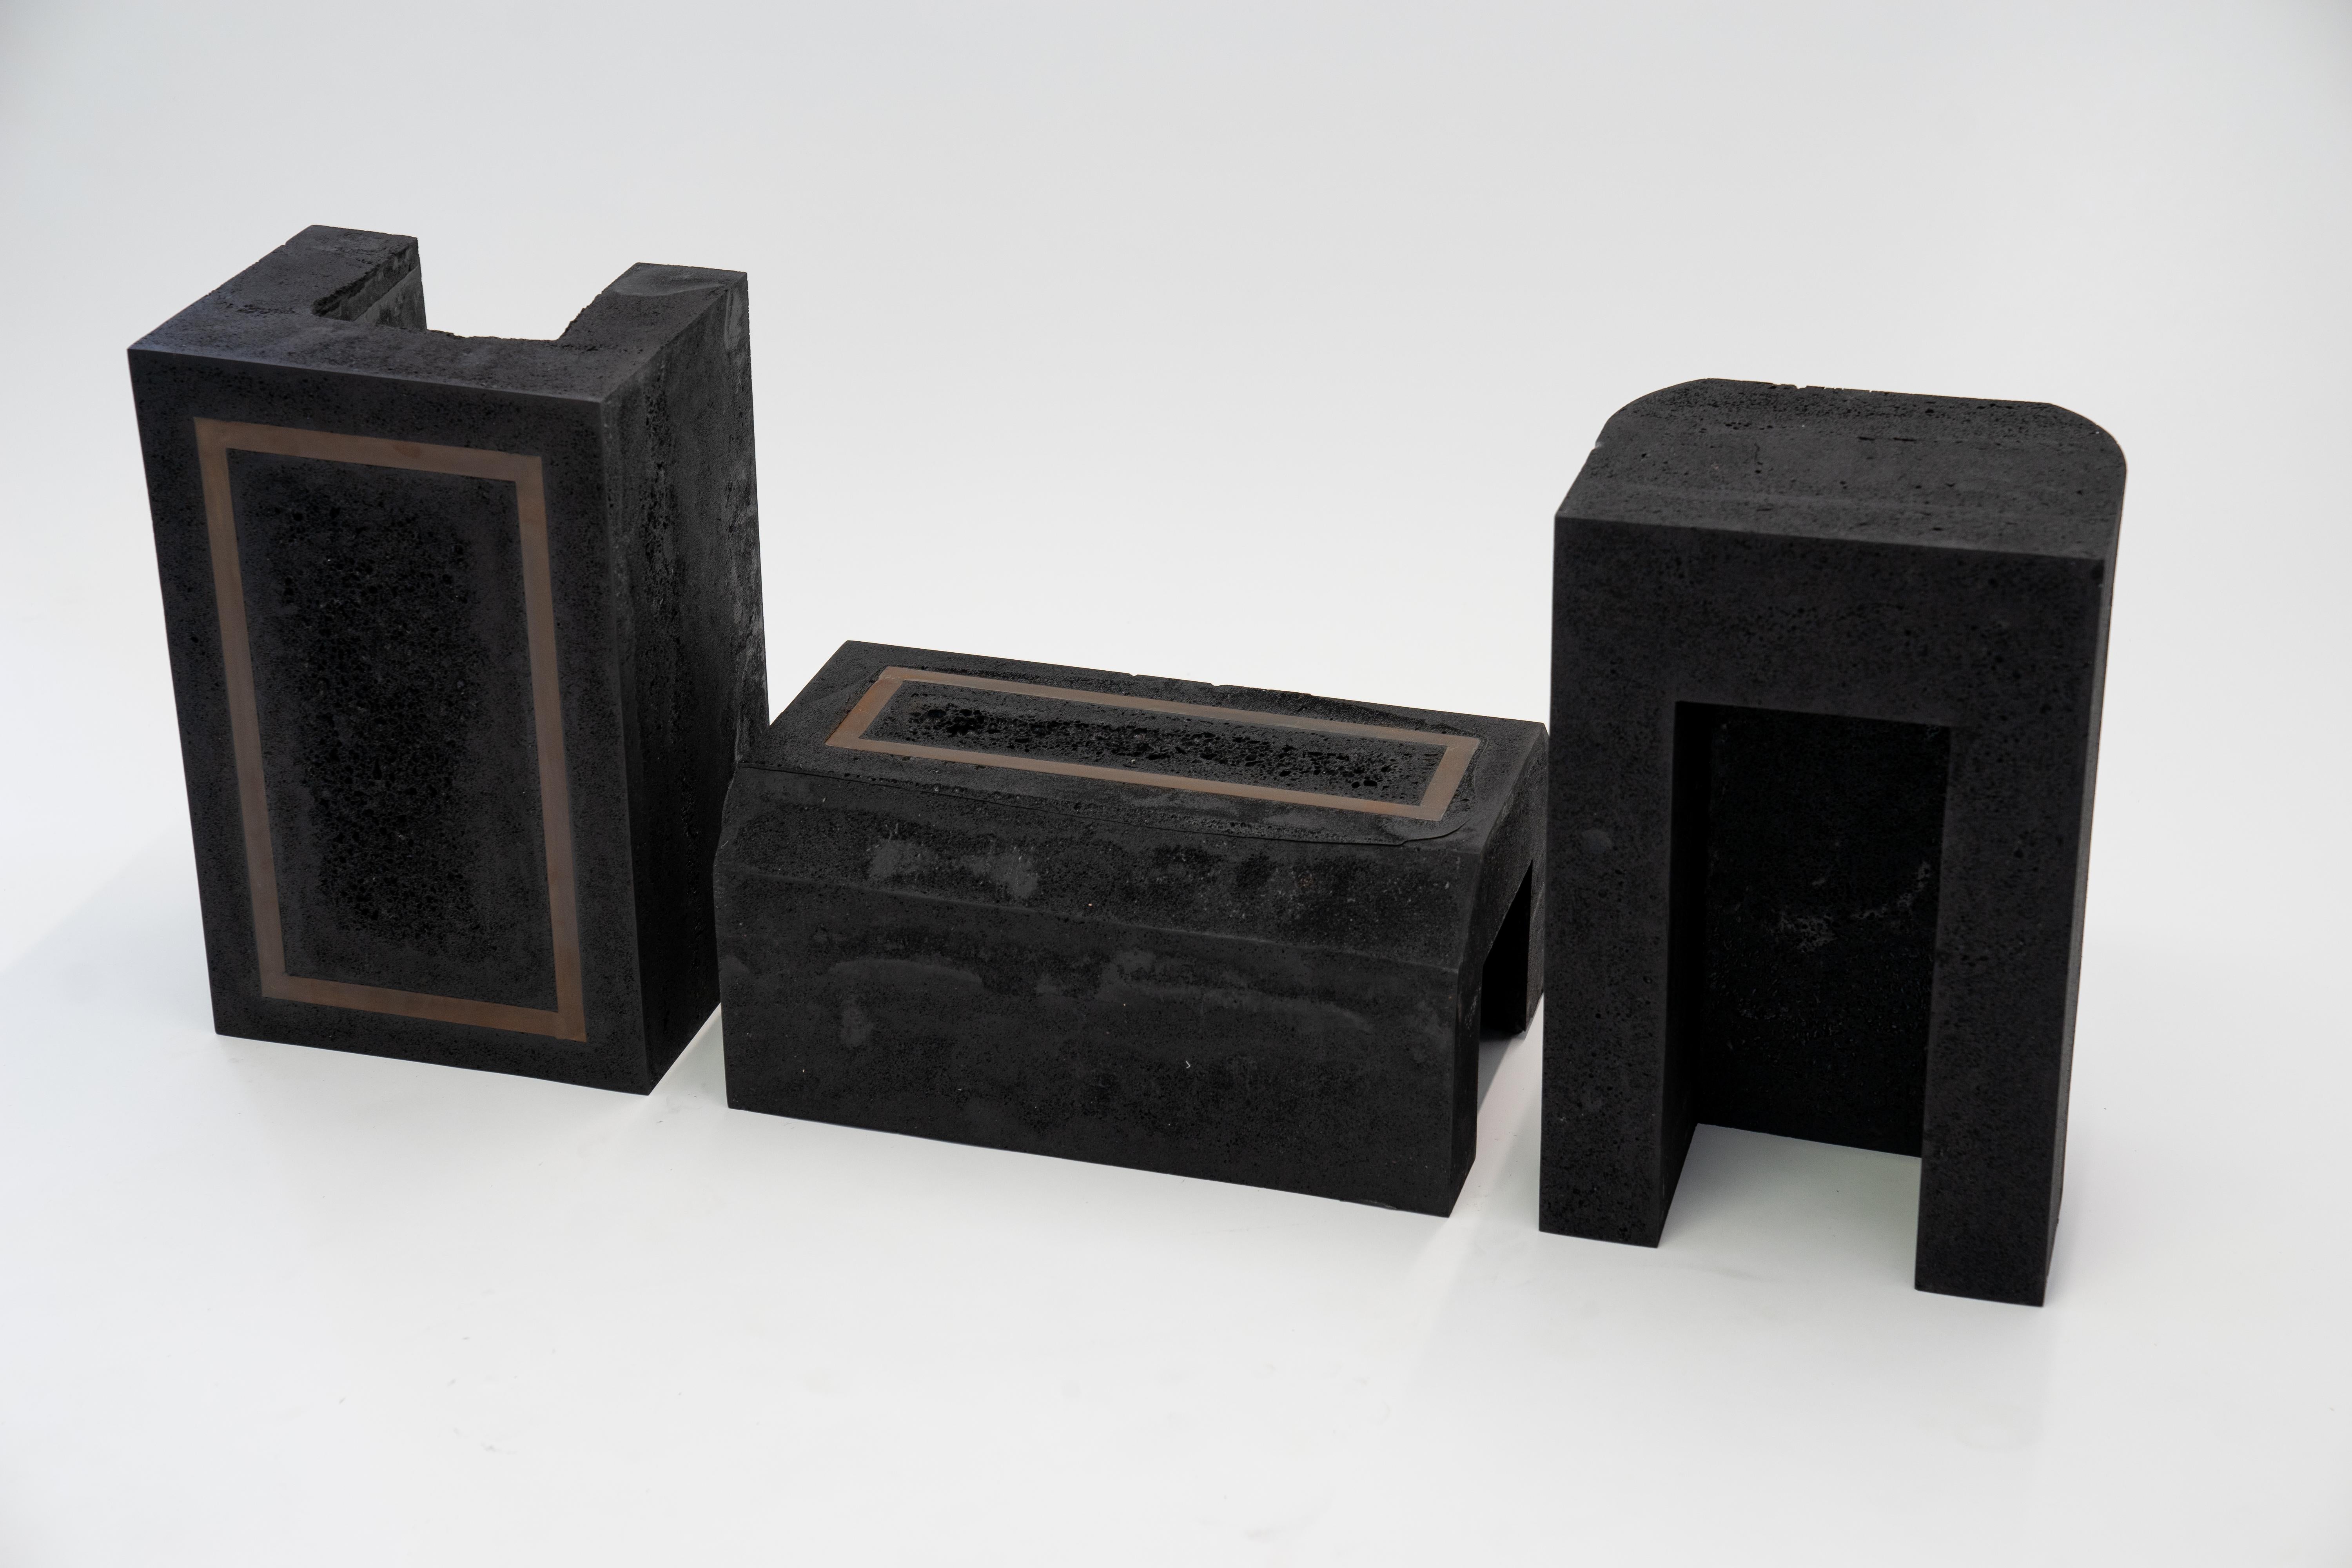 Set of 3 Modern Side Tables Contemporary Handmade, Graphite, Resin, Steel Inlay In New Condition For Sale In Bronx, NY